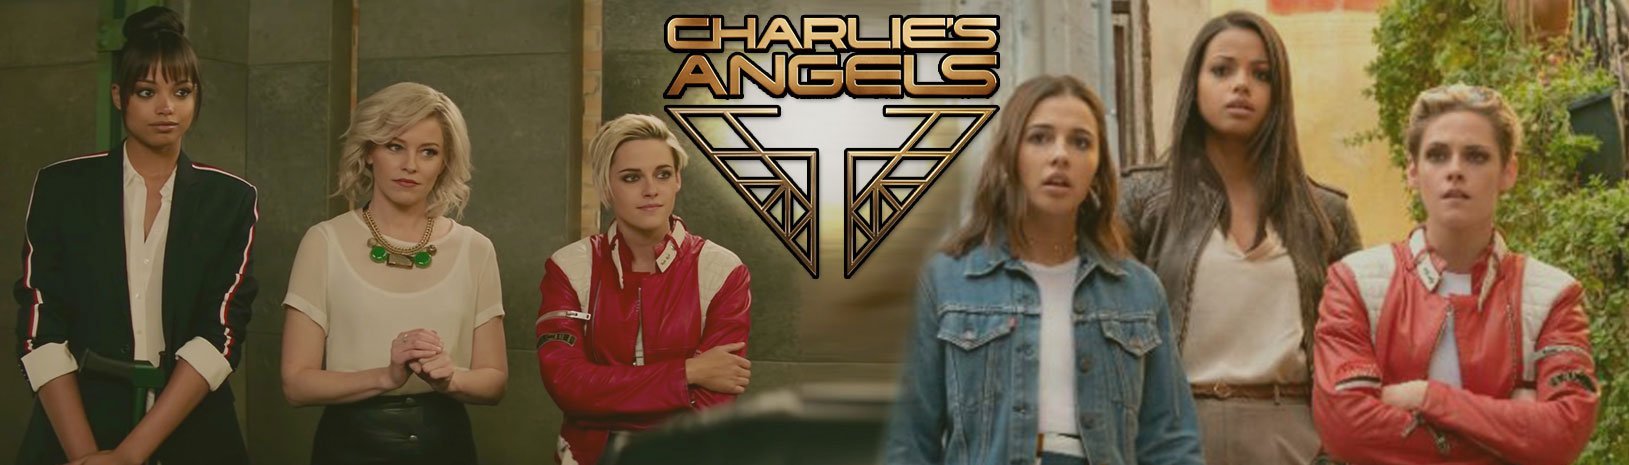 Charlie's Angels Jackets